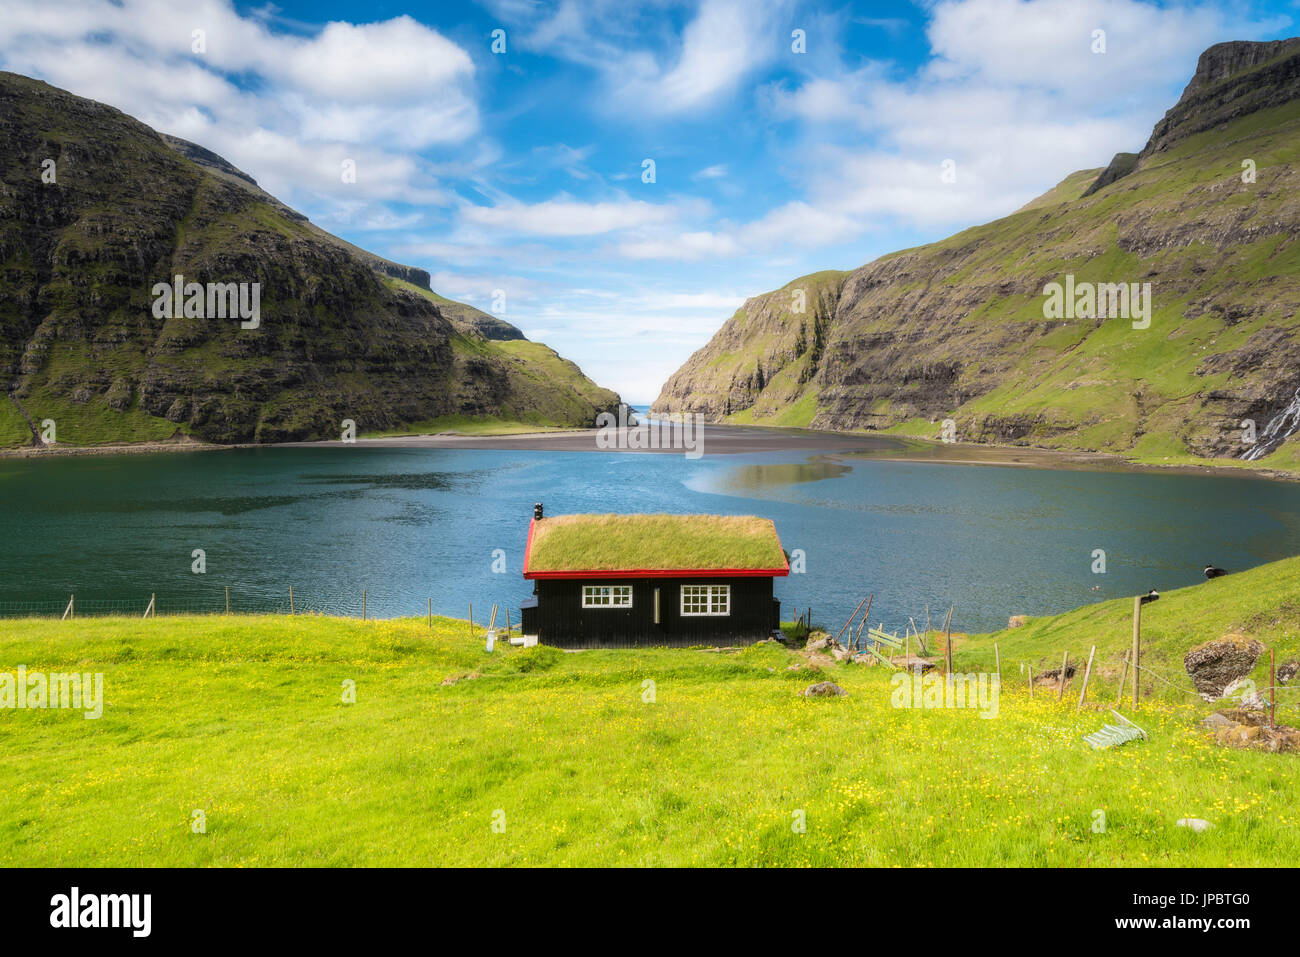 Saksun, Stremnoy island, Faroe Islands, Denmark. Iconic house with grass roof in front of the fiord. Stock Photo